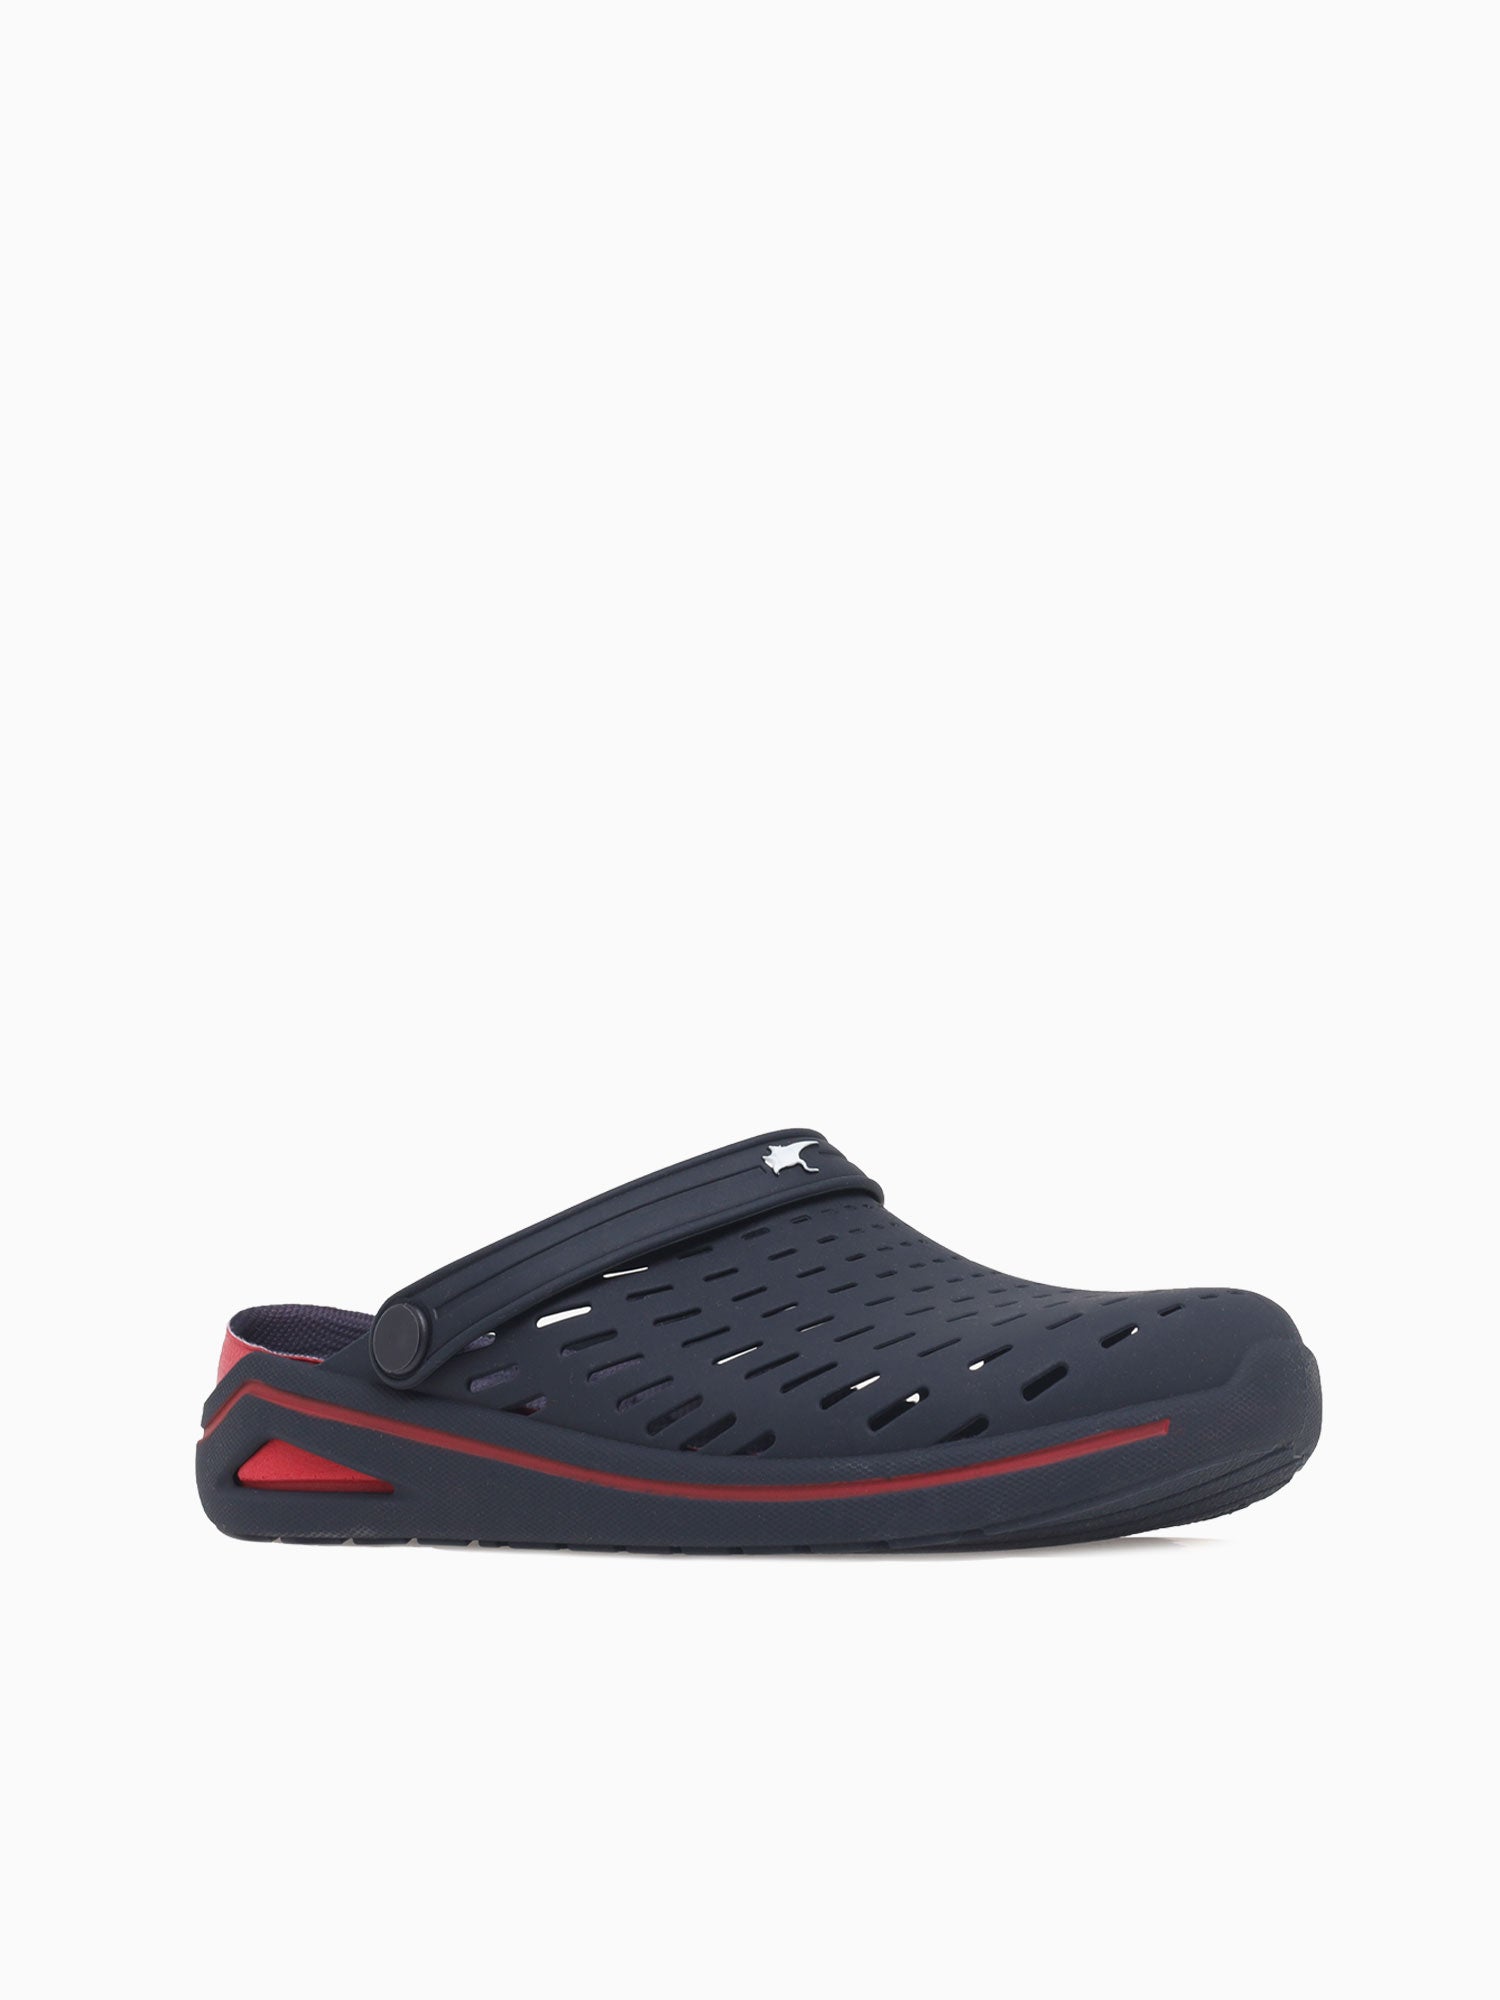 Wakeboard Navy Red